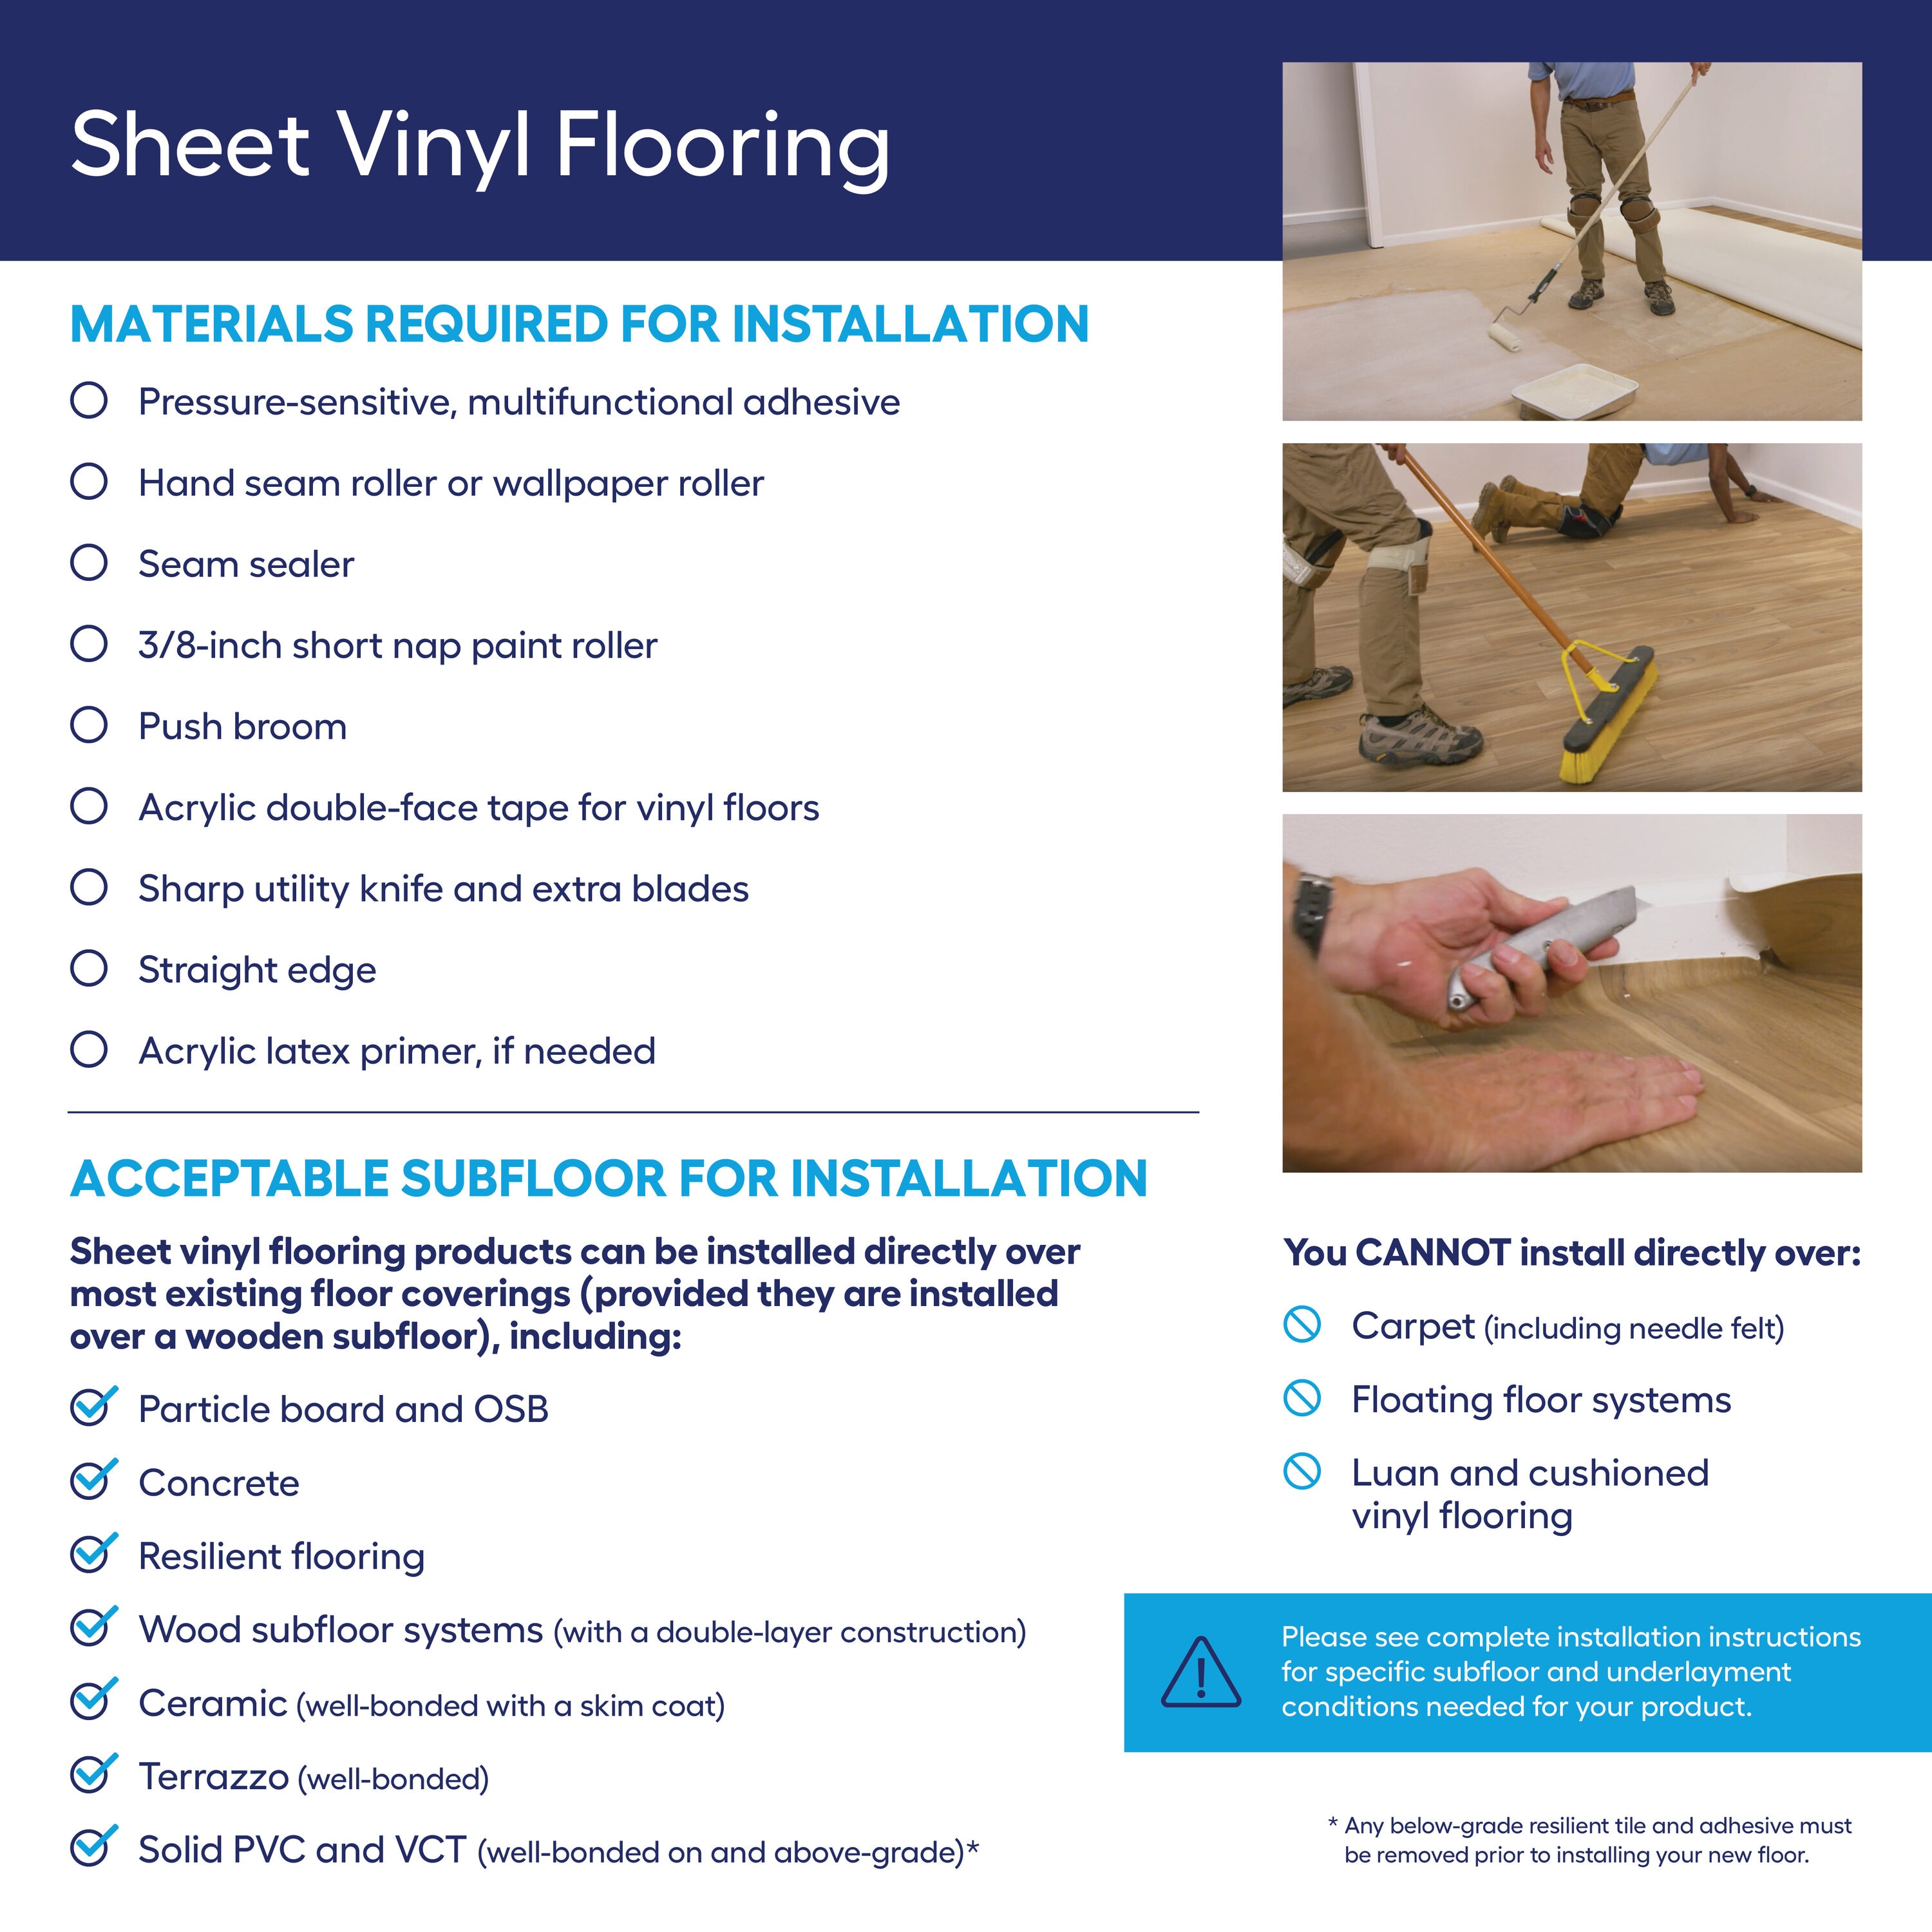 What is a Good Thickness for Vinyl Sheet Flooring at Home in Westford, MA?